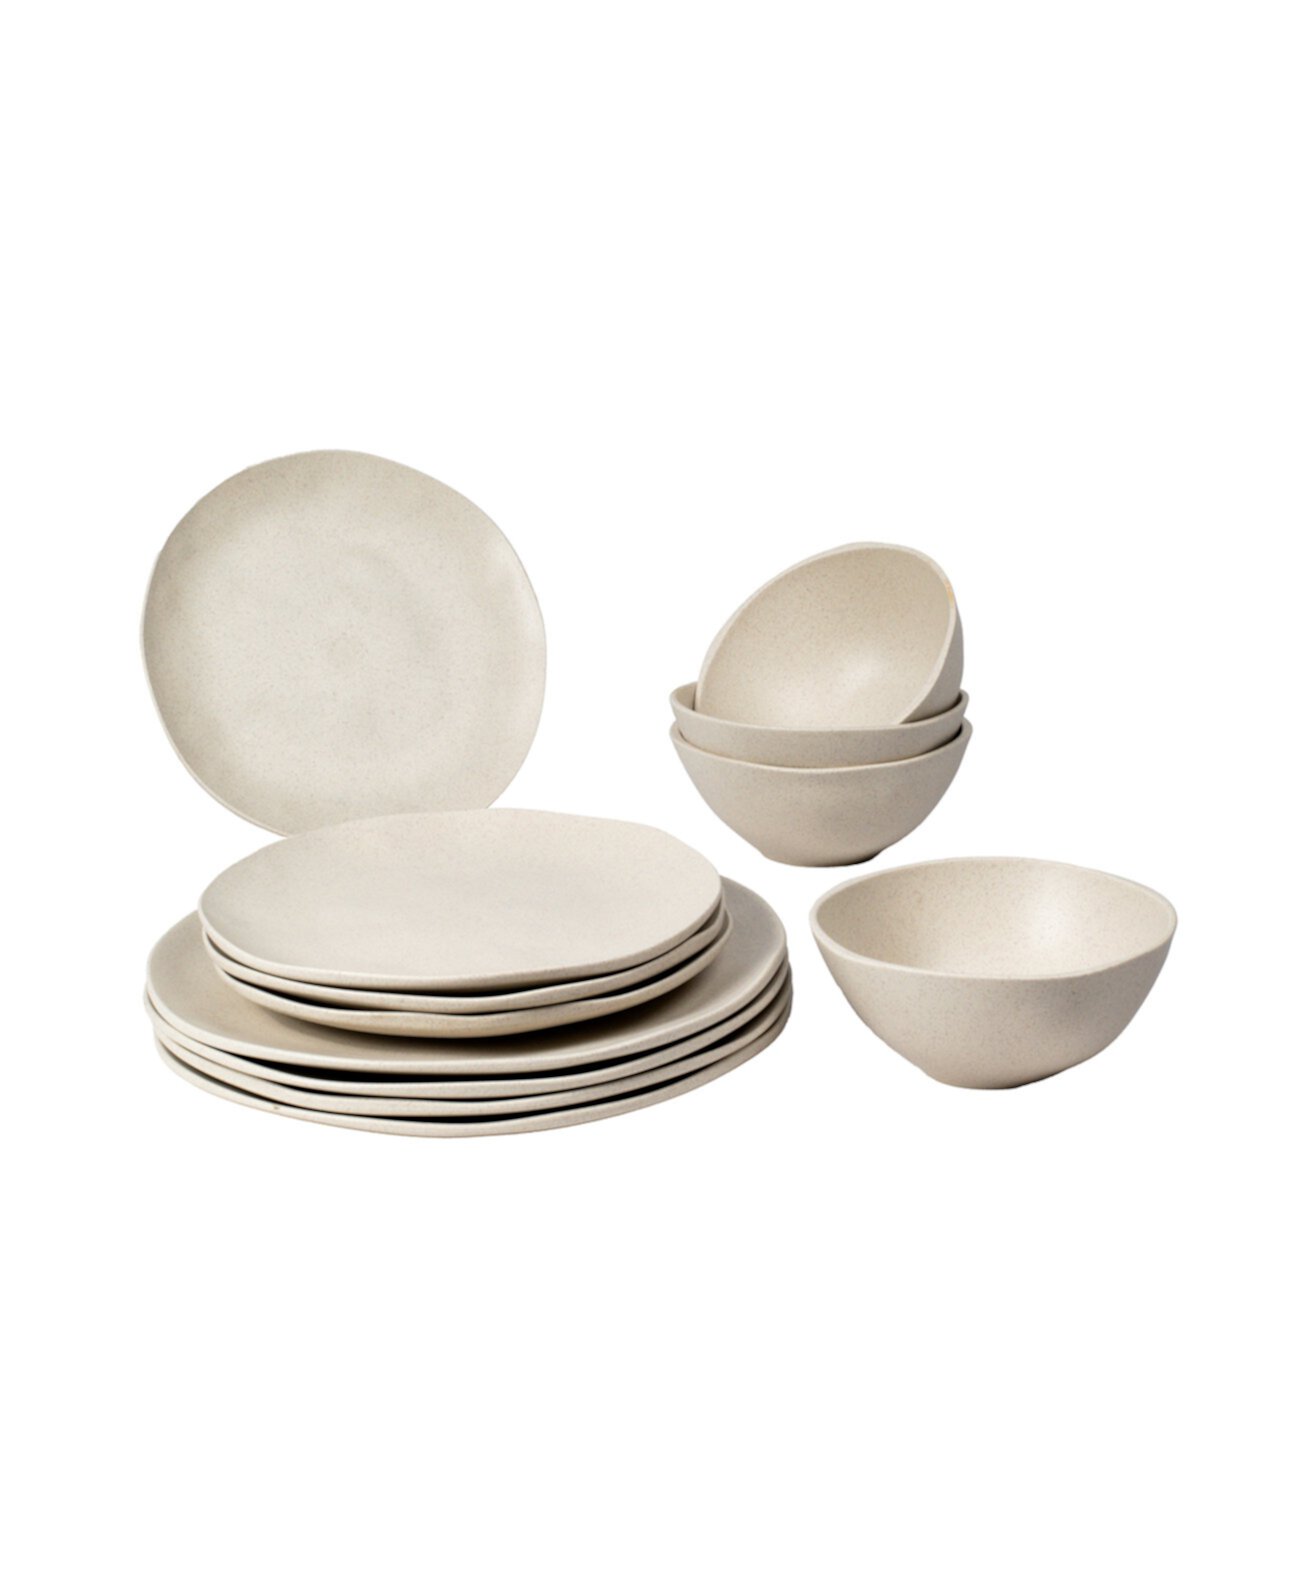 Organic Coupe Wheat 12 Piece Dinnerware Set, Service for 4 TarHong